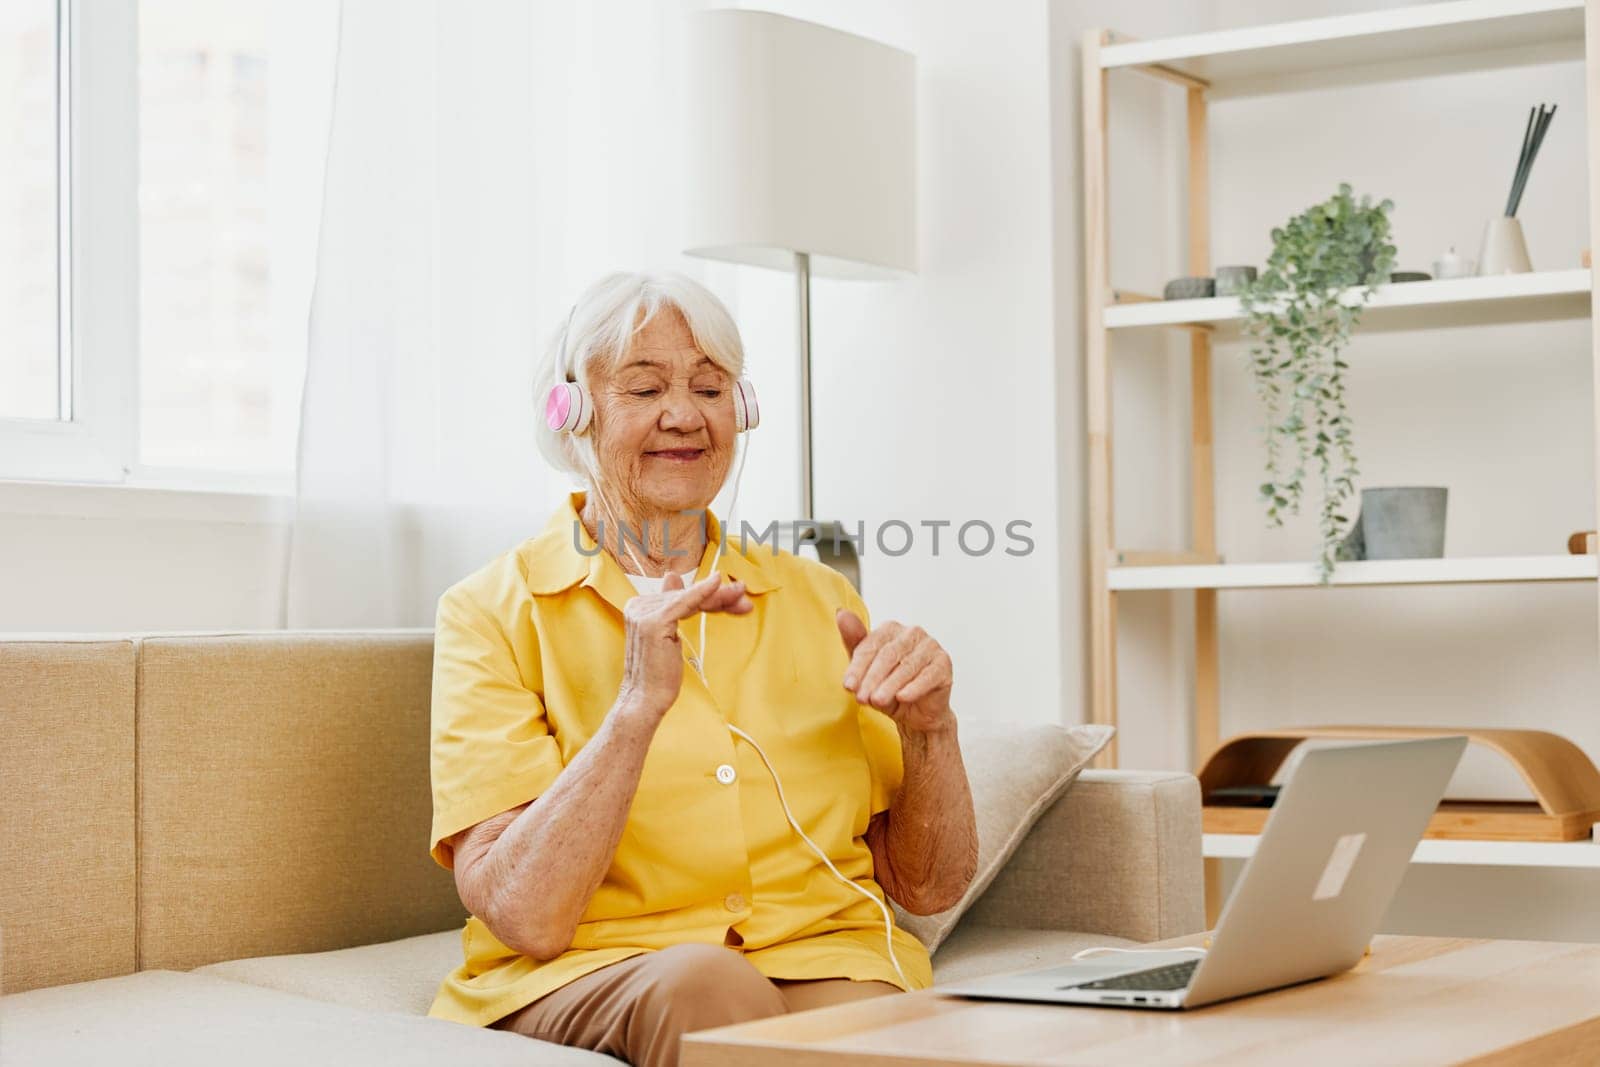 An elderly woman wearing headphones with a laptop communicating online by video call, sitting on the couch at home and working in a yellow shirt in front of a window, the lifestyle of a retired woman. High quality photo